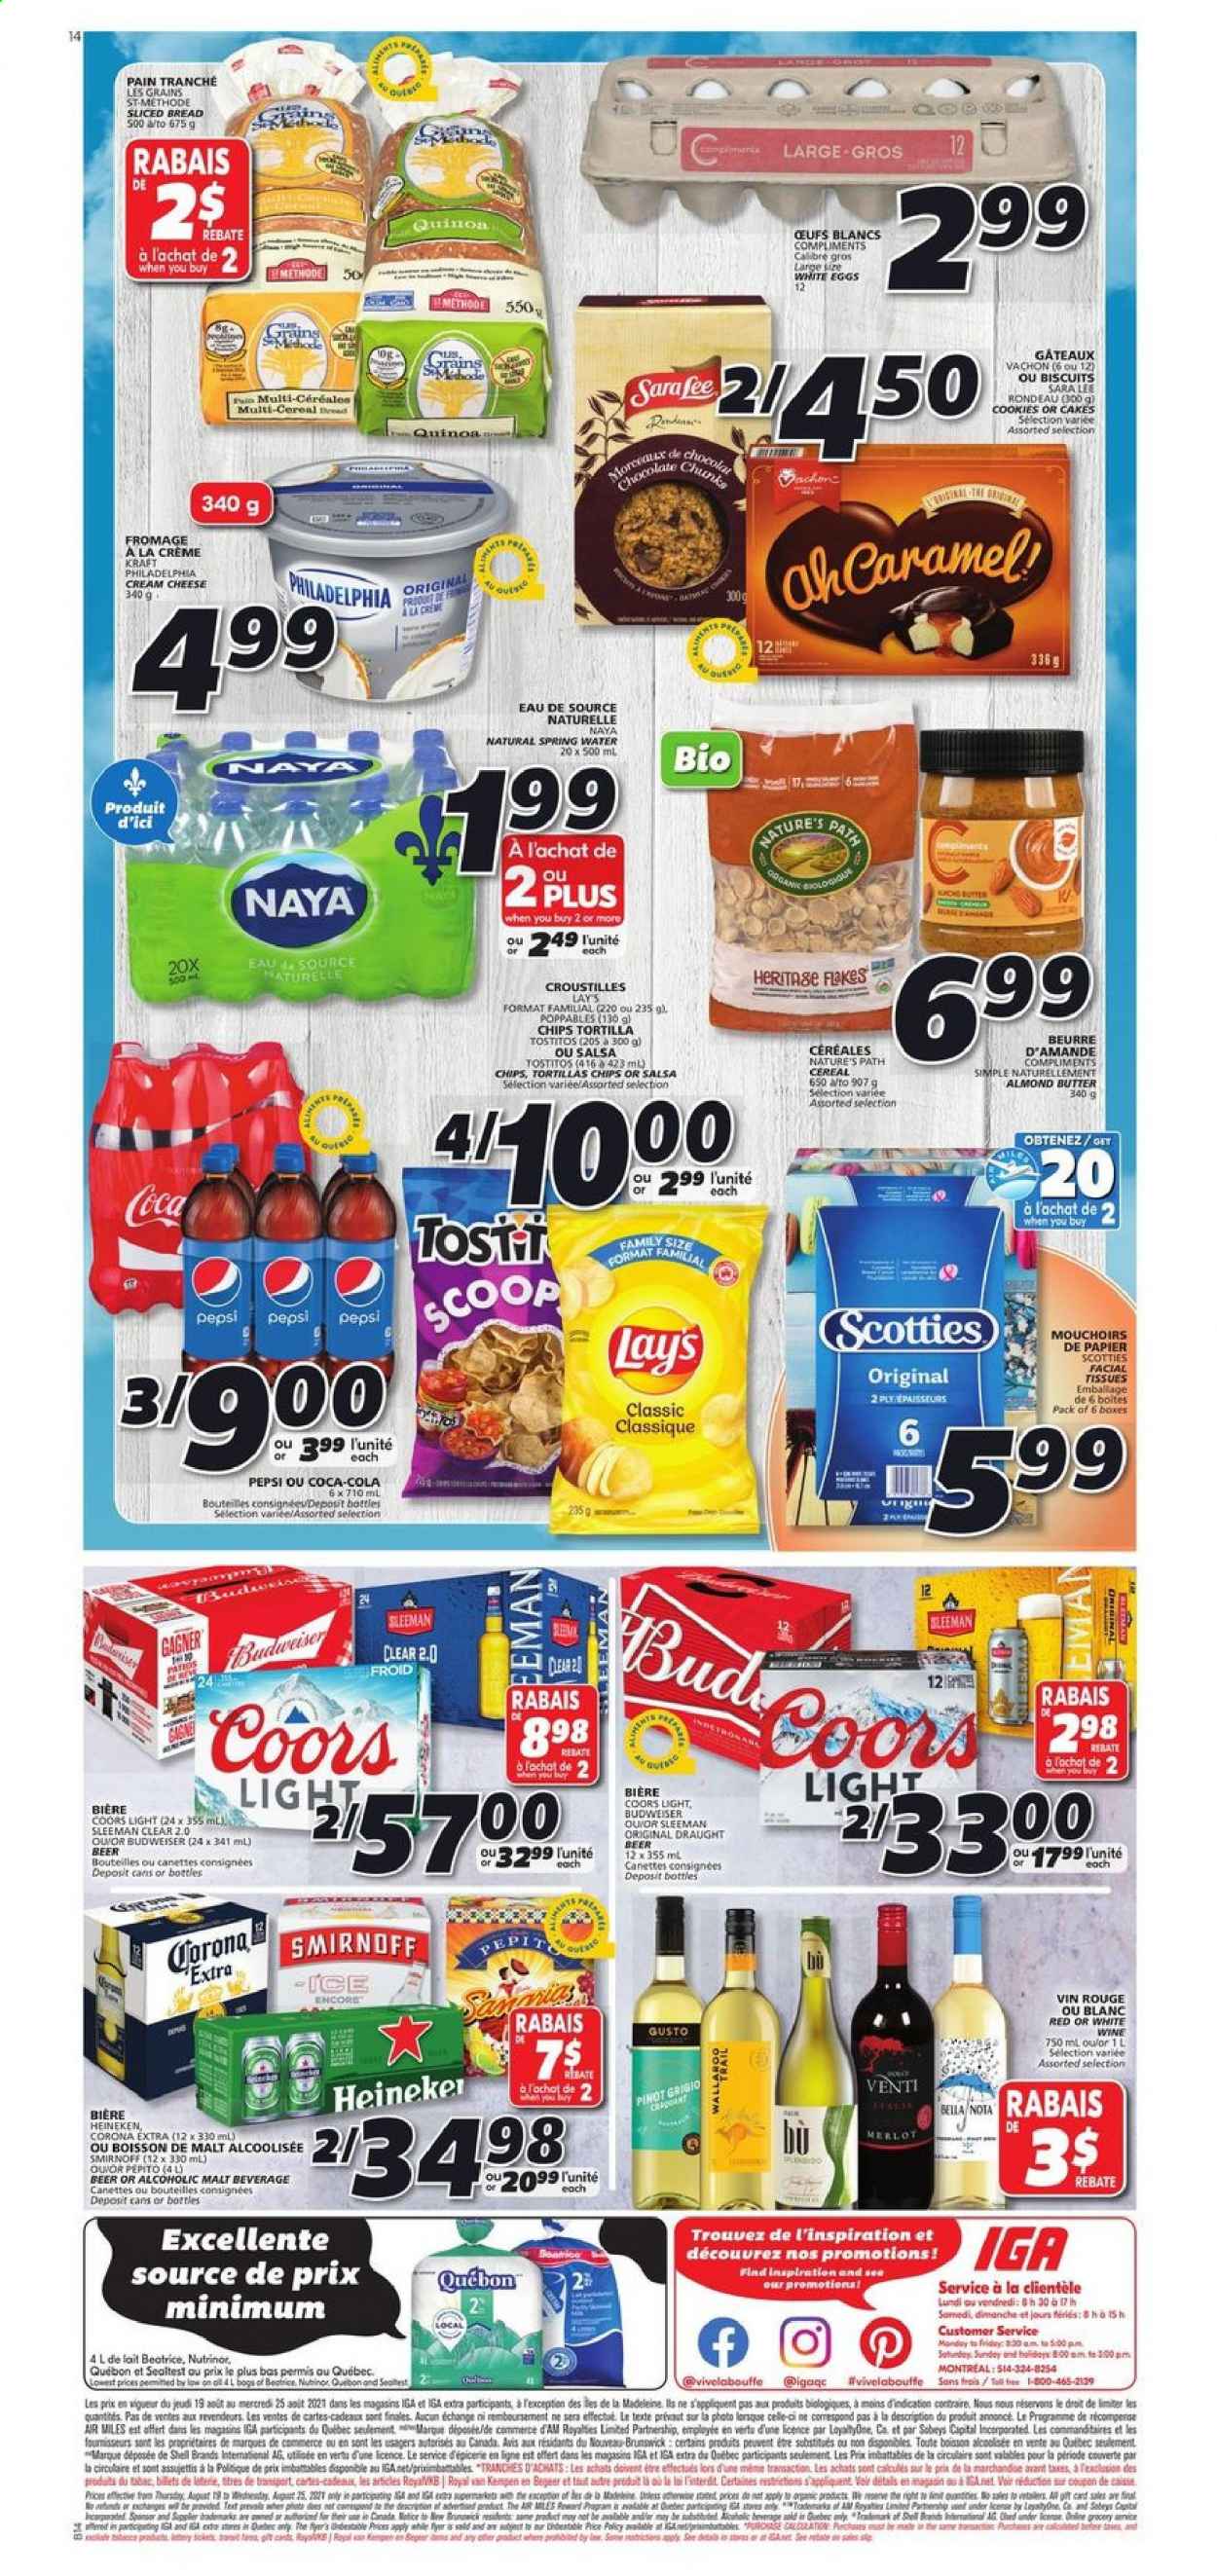 thumbnail - IGA Flyer - August 19, 2021 - August 25, 2021 - Sales products - bread, tortillas, cake, Sara Lee, Kraft®, cream cheese, cheese, eggs, almond butter, cookies, biscuit, Lay’s, Tostitos, malt, cereals, salsa, Coca-Cola, Pepsi, spring water, red wine, white wine, wine, Merlot, Pinot Grigio, Smirnoff, beer, Corona Extra, Heineken, quinoa, chips, Coors. Page 2.